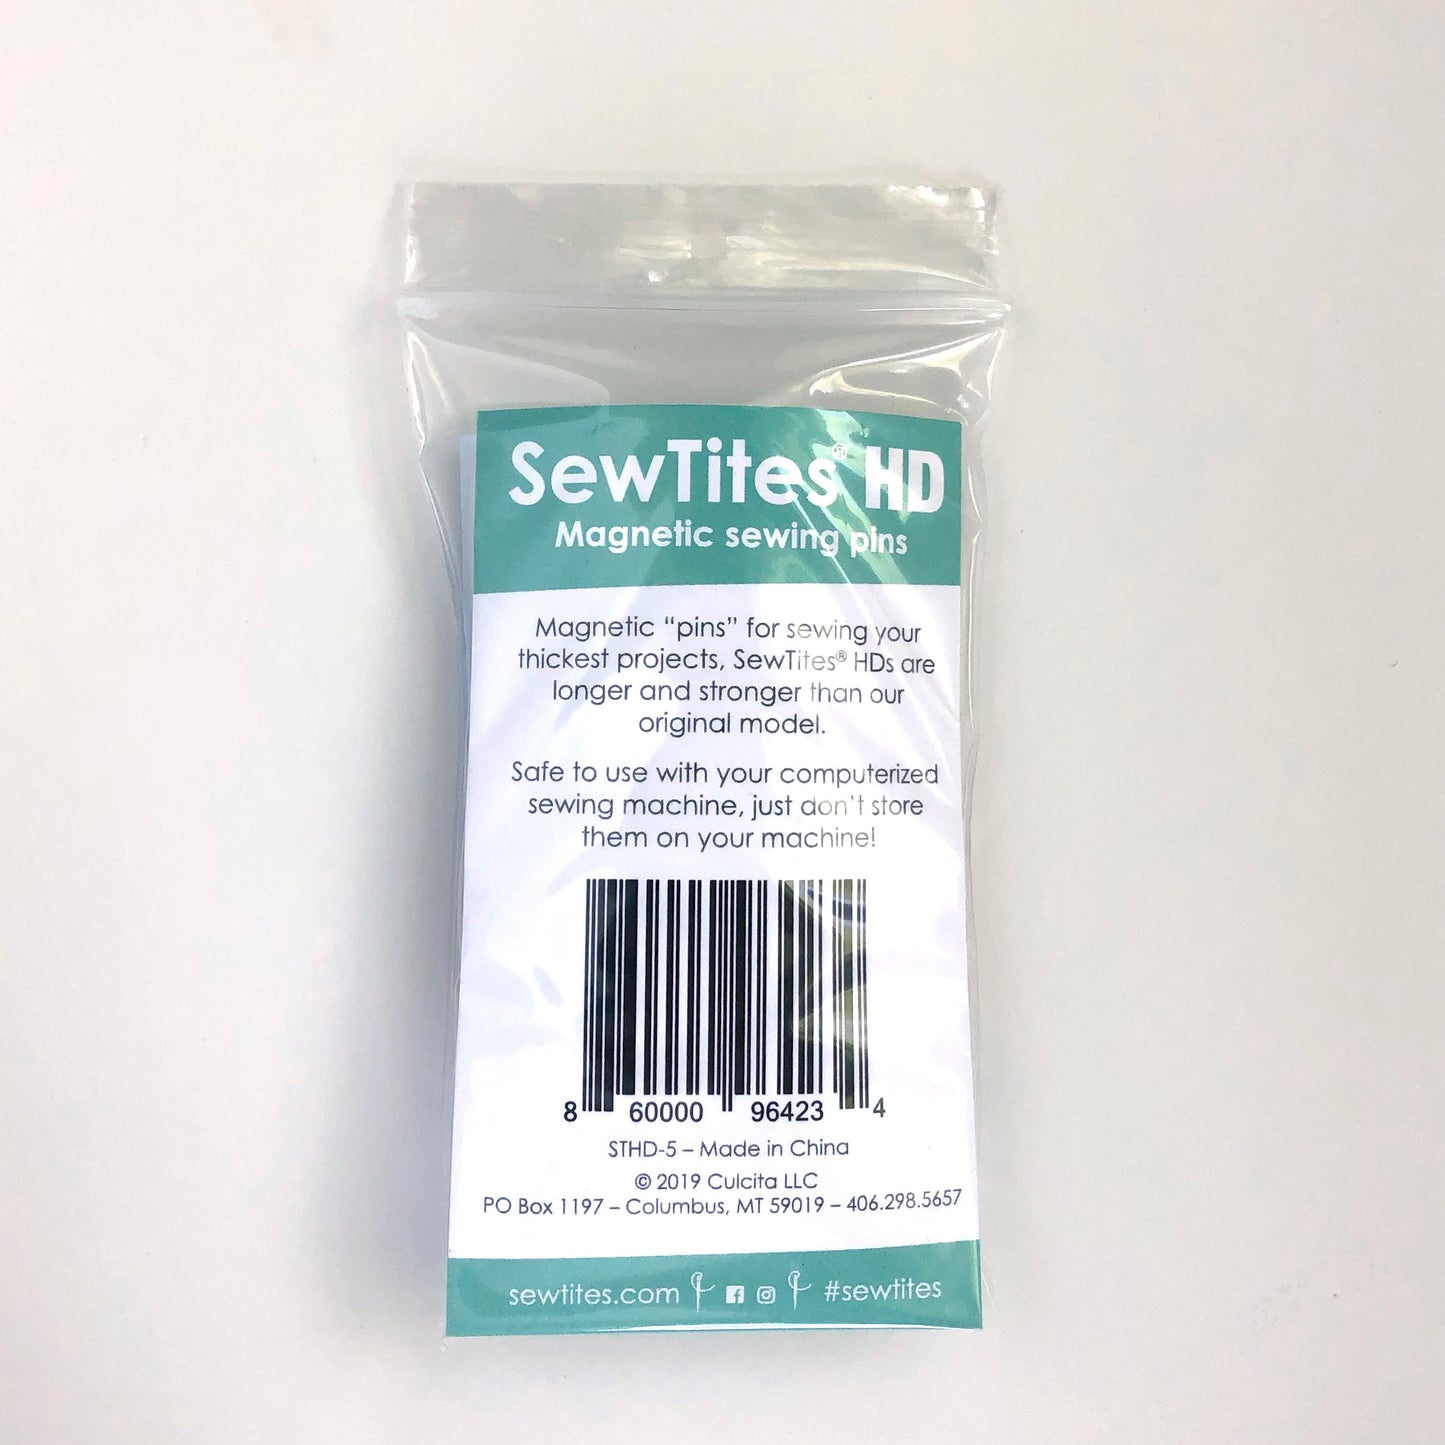 SewTites Magnetic Pin HD, 5-pack